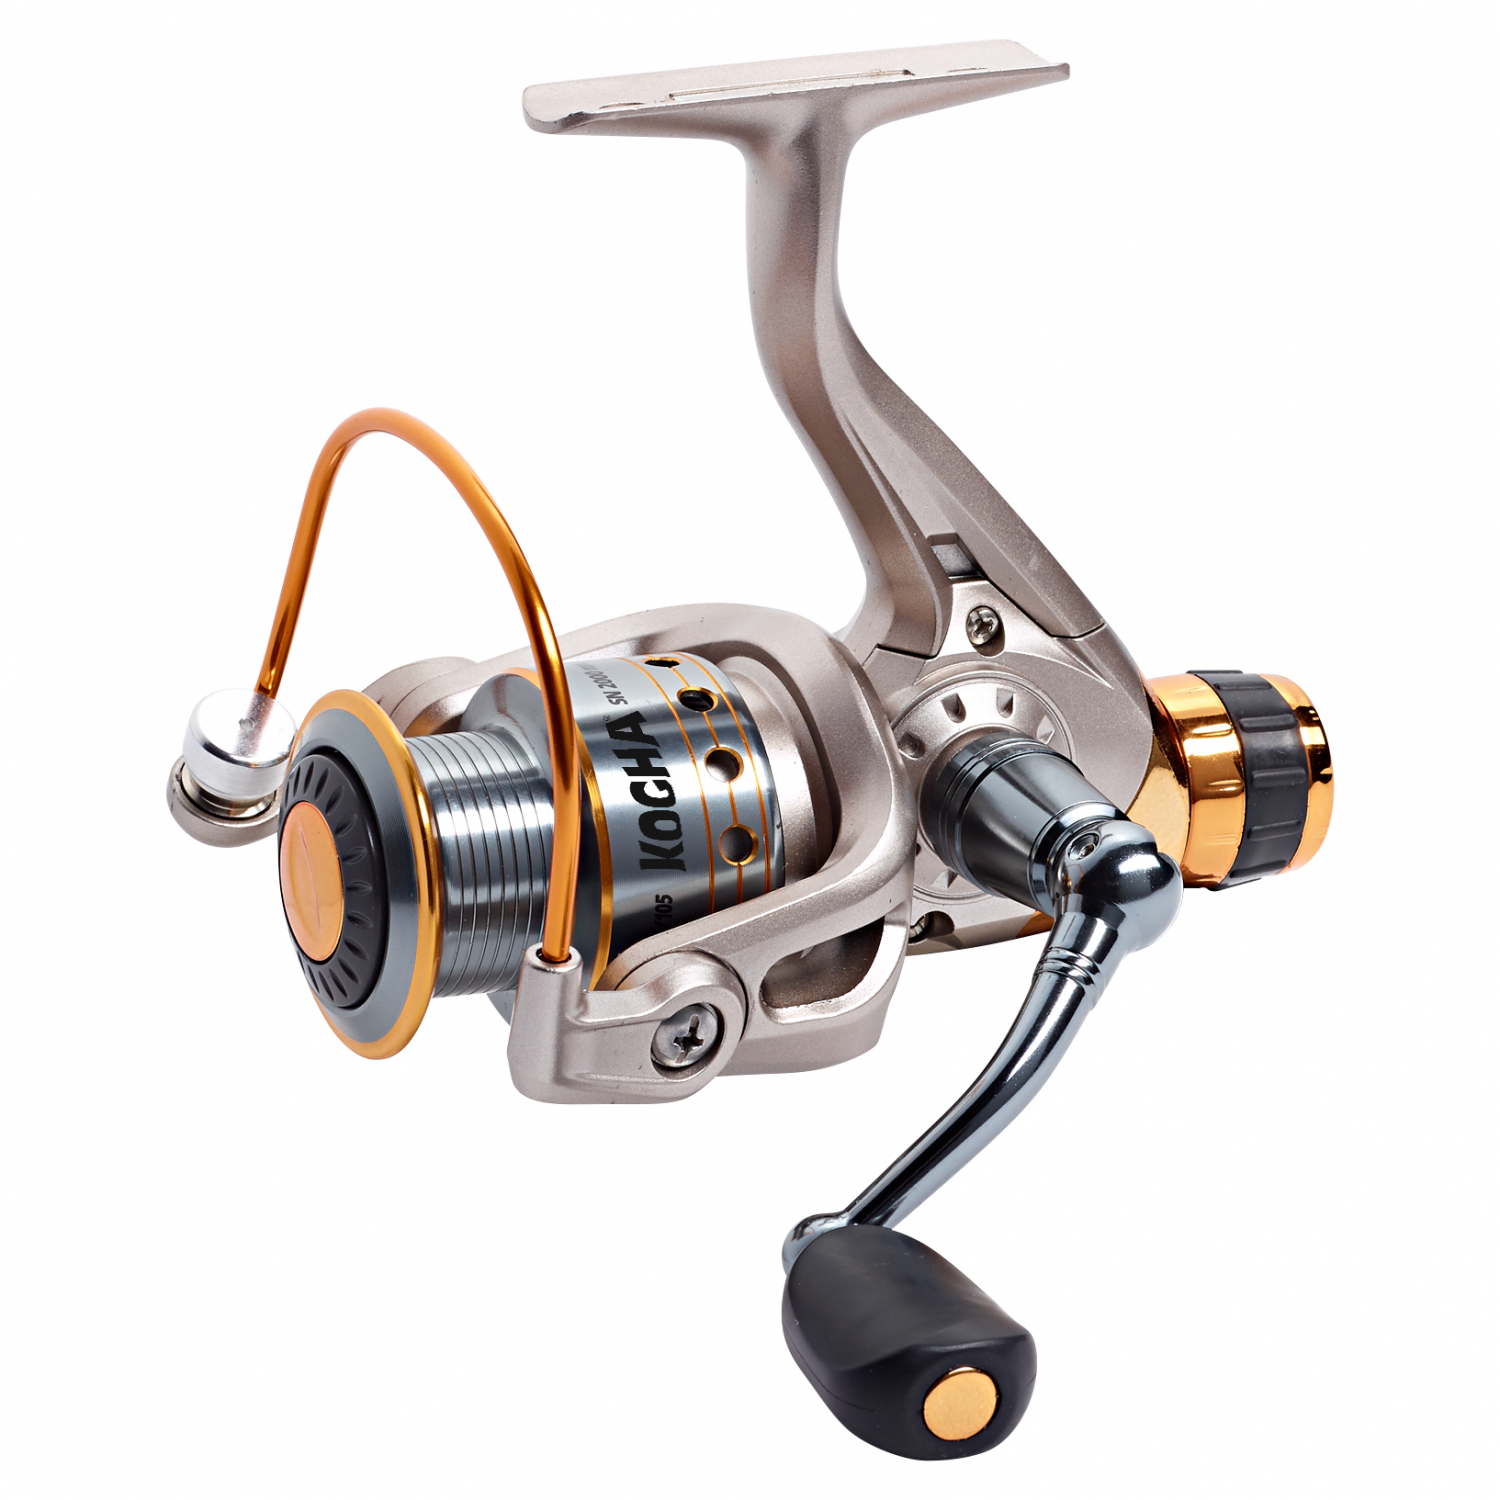 Kogha Fishing Reel Synox 2000 at low prices